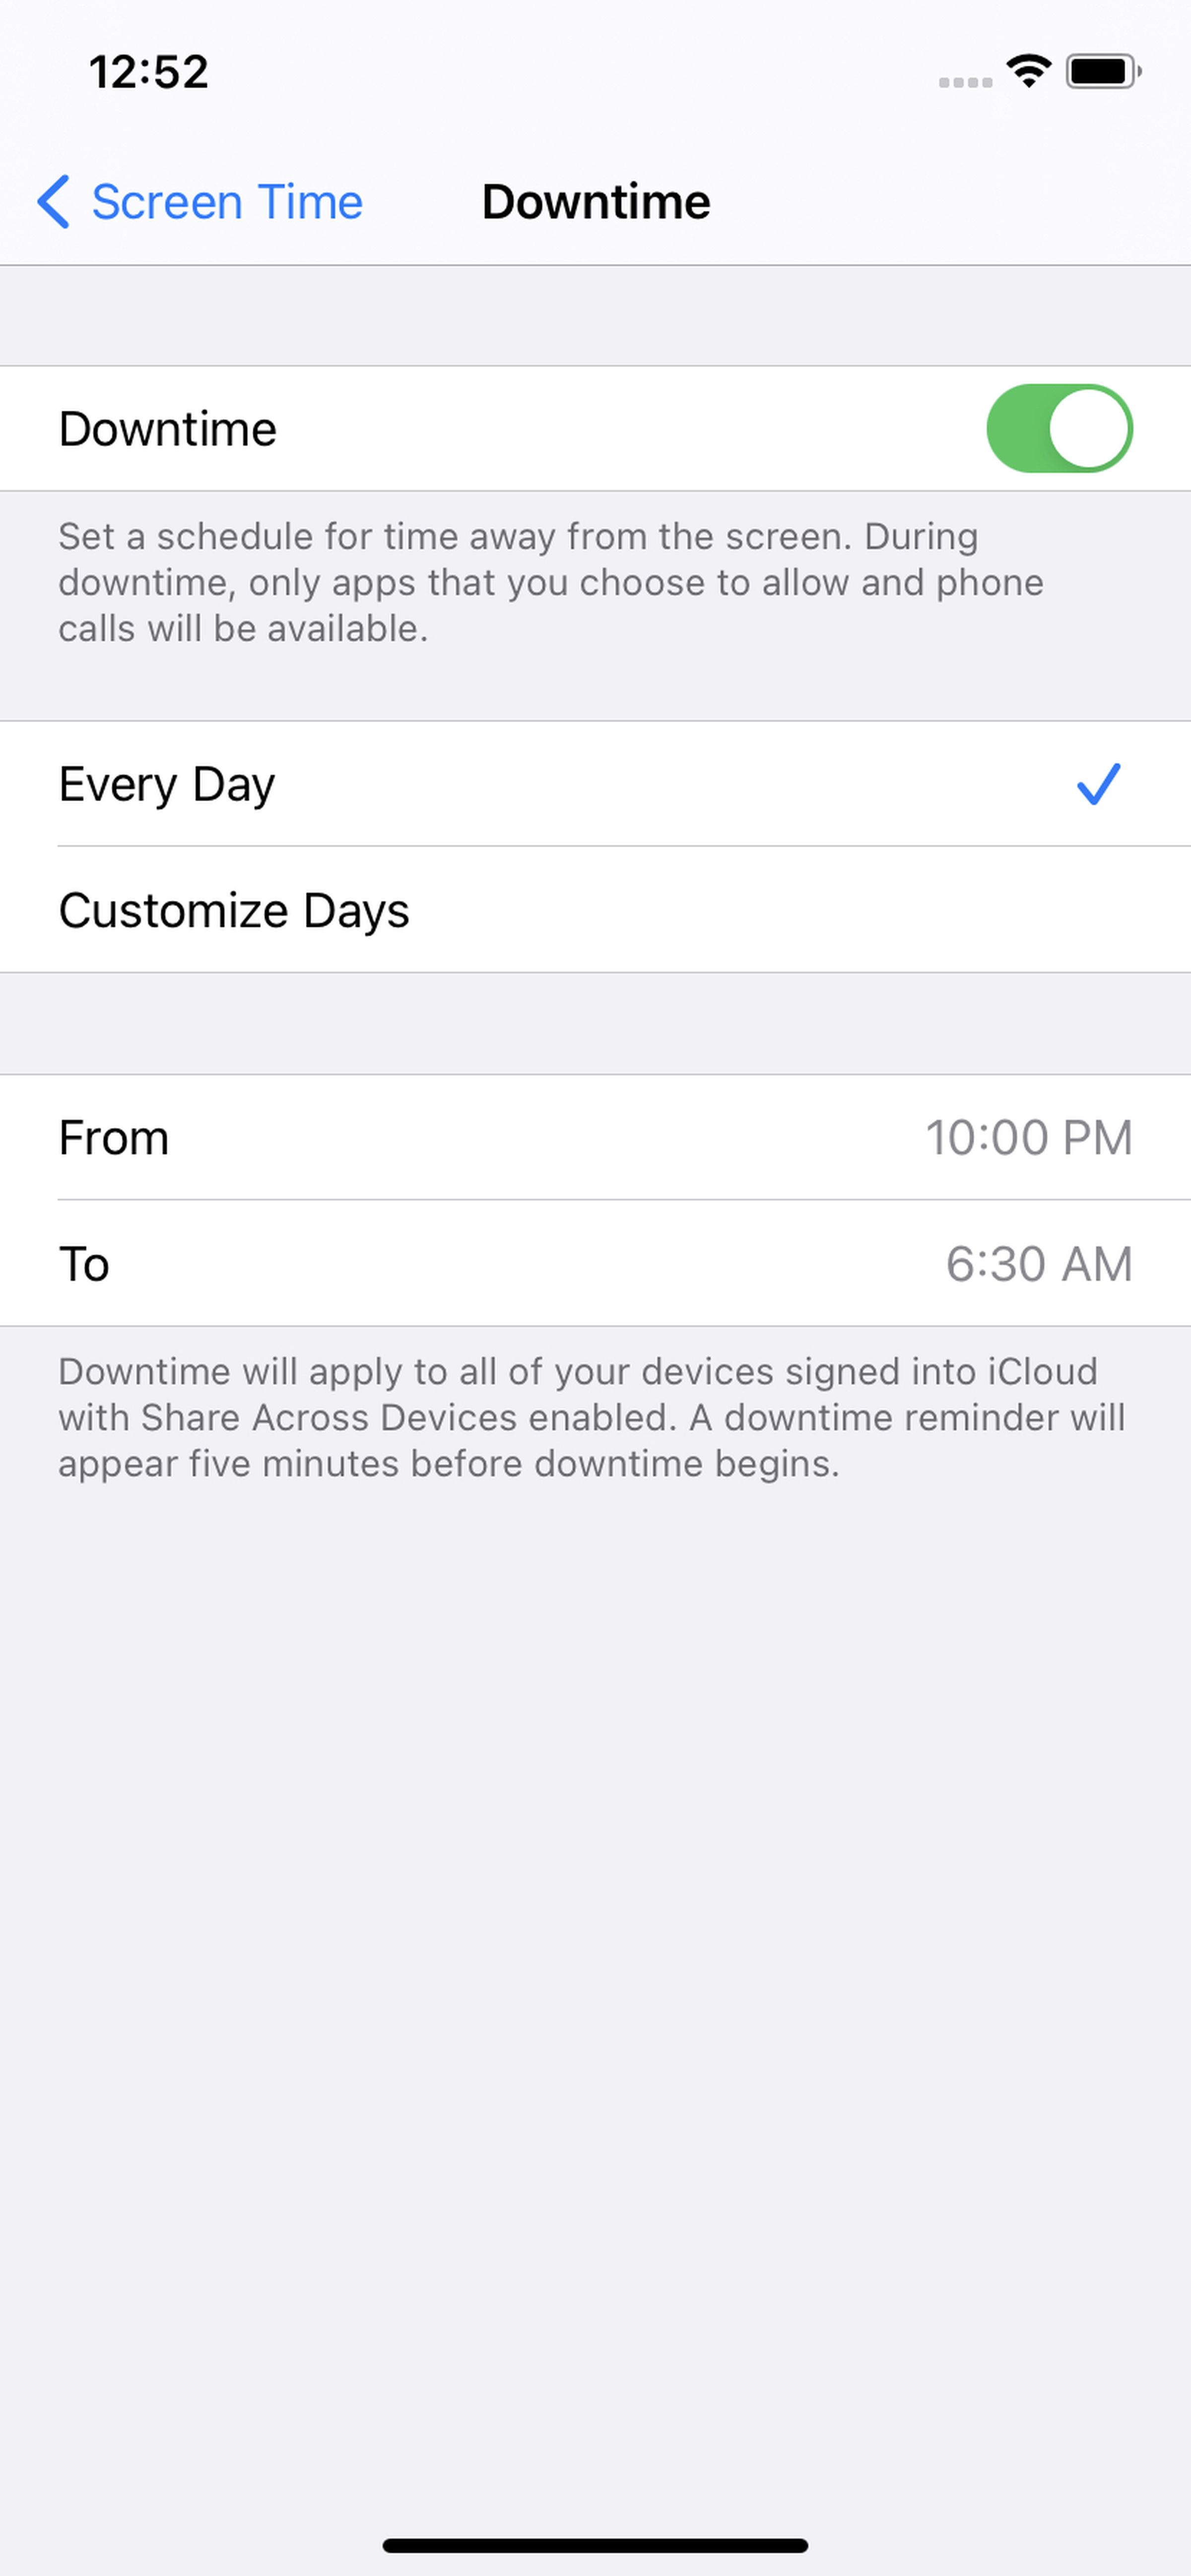 You can set Downtime for everyday or specific days, and for set times for each day